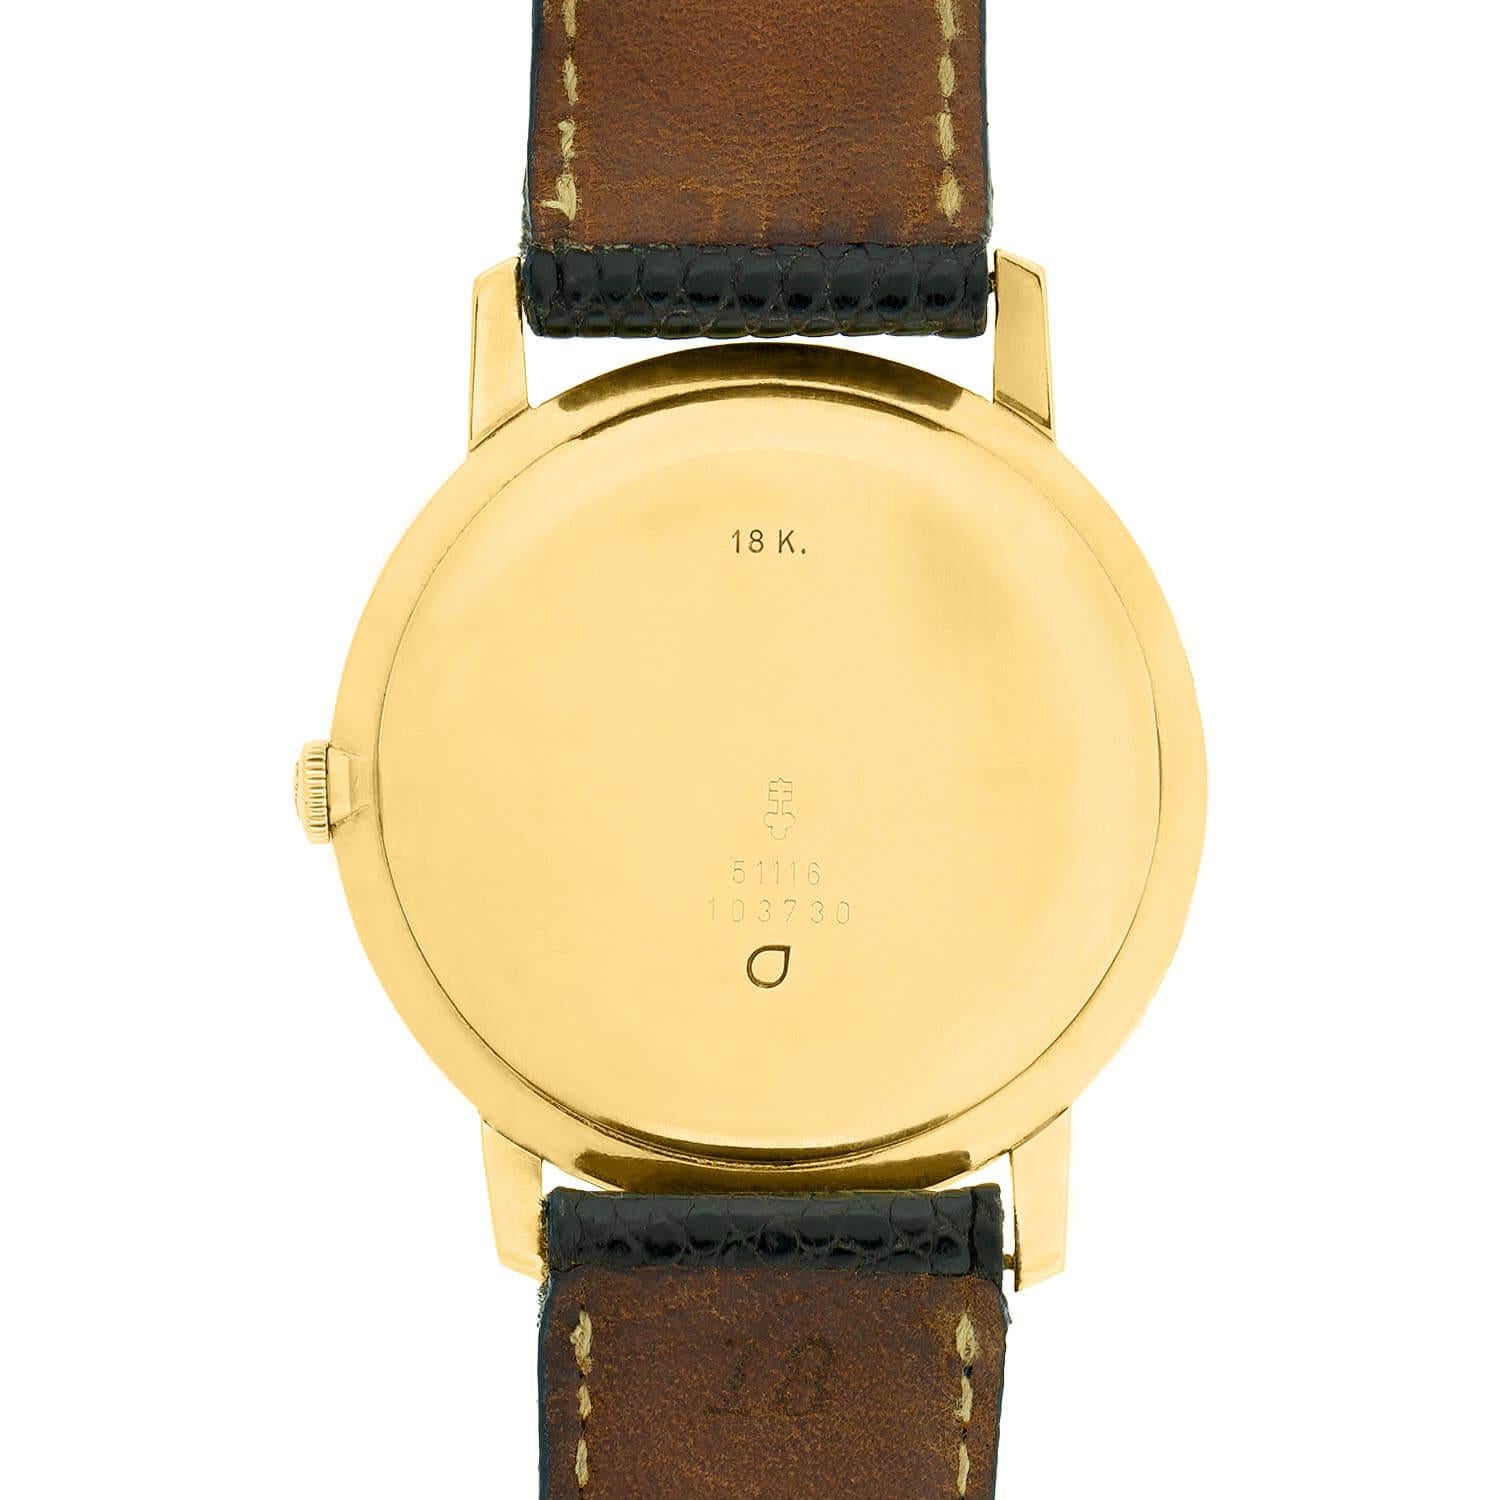 CORUM for VAN CLEEF & ARPELS Estate 14k/18k Gold Watch with Lizard Skin Band In Good Condition For Sale In Narberth, PA